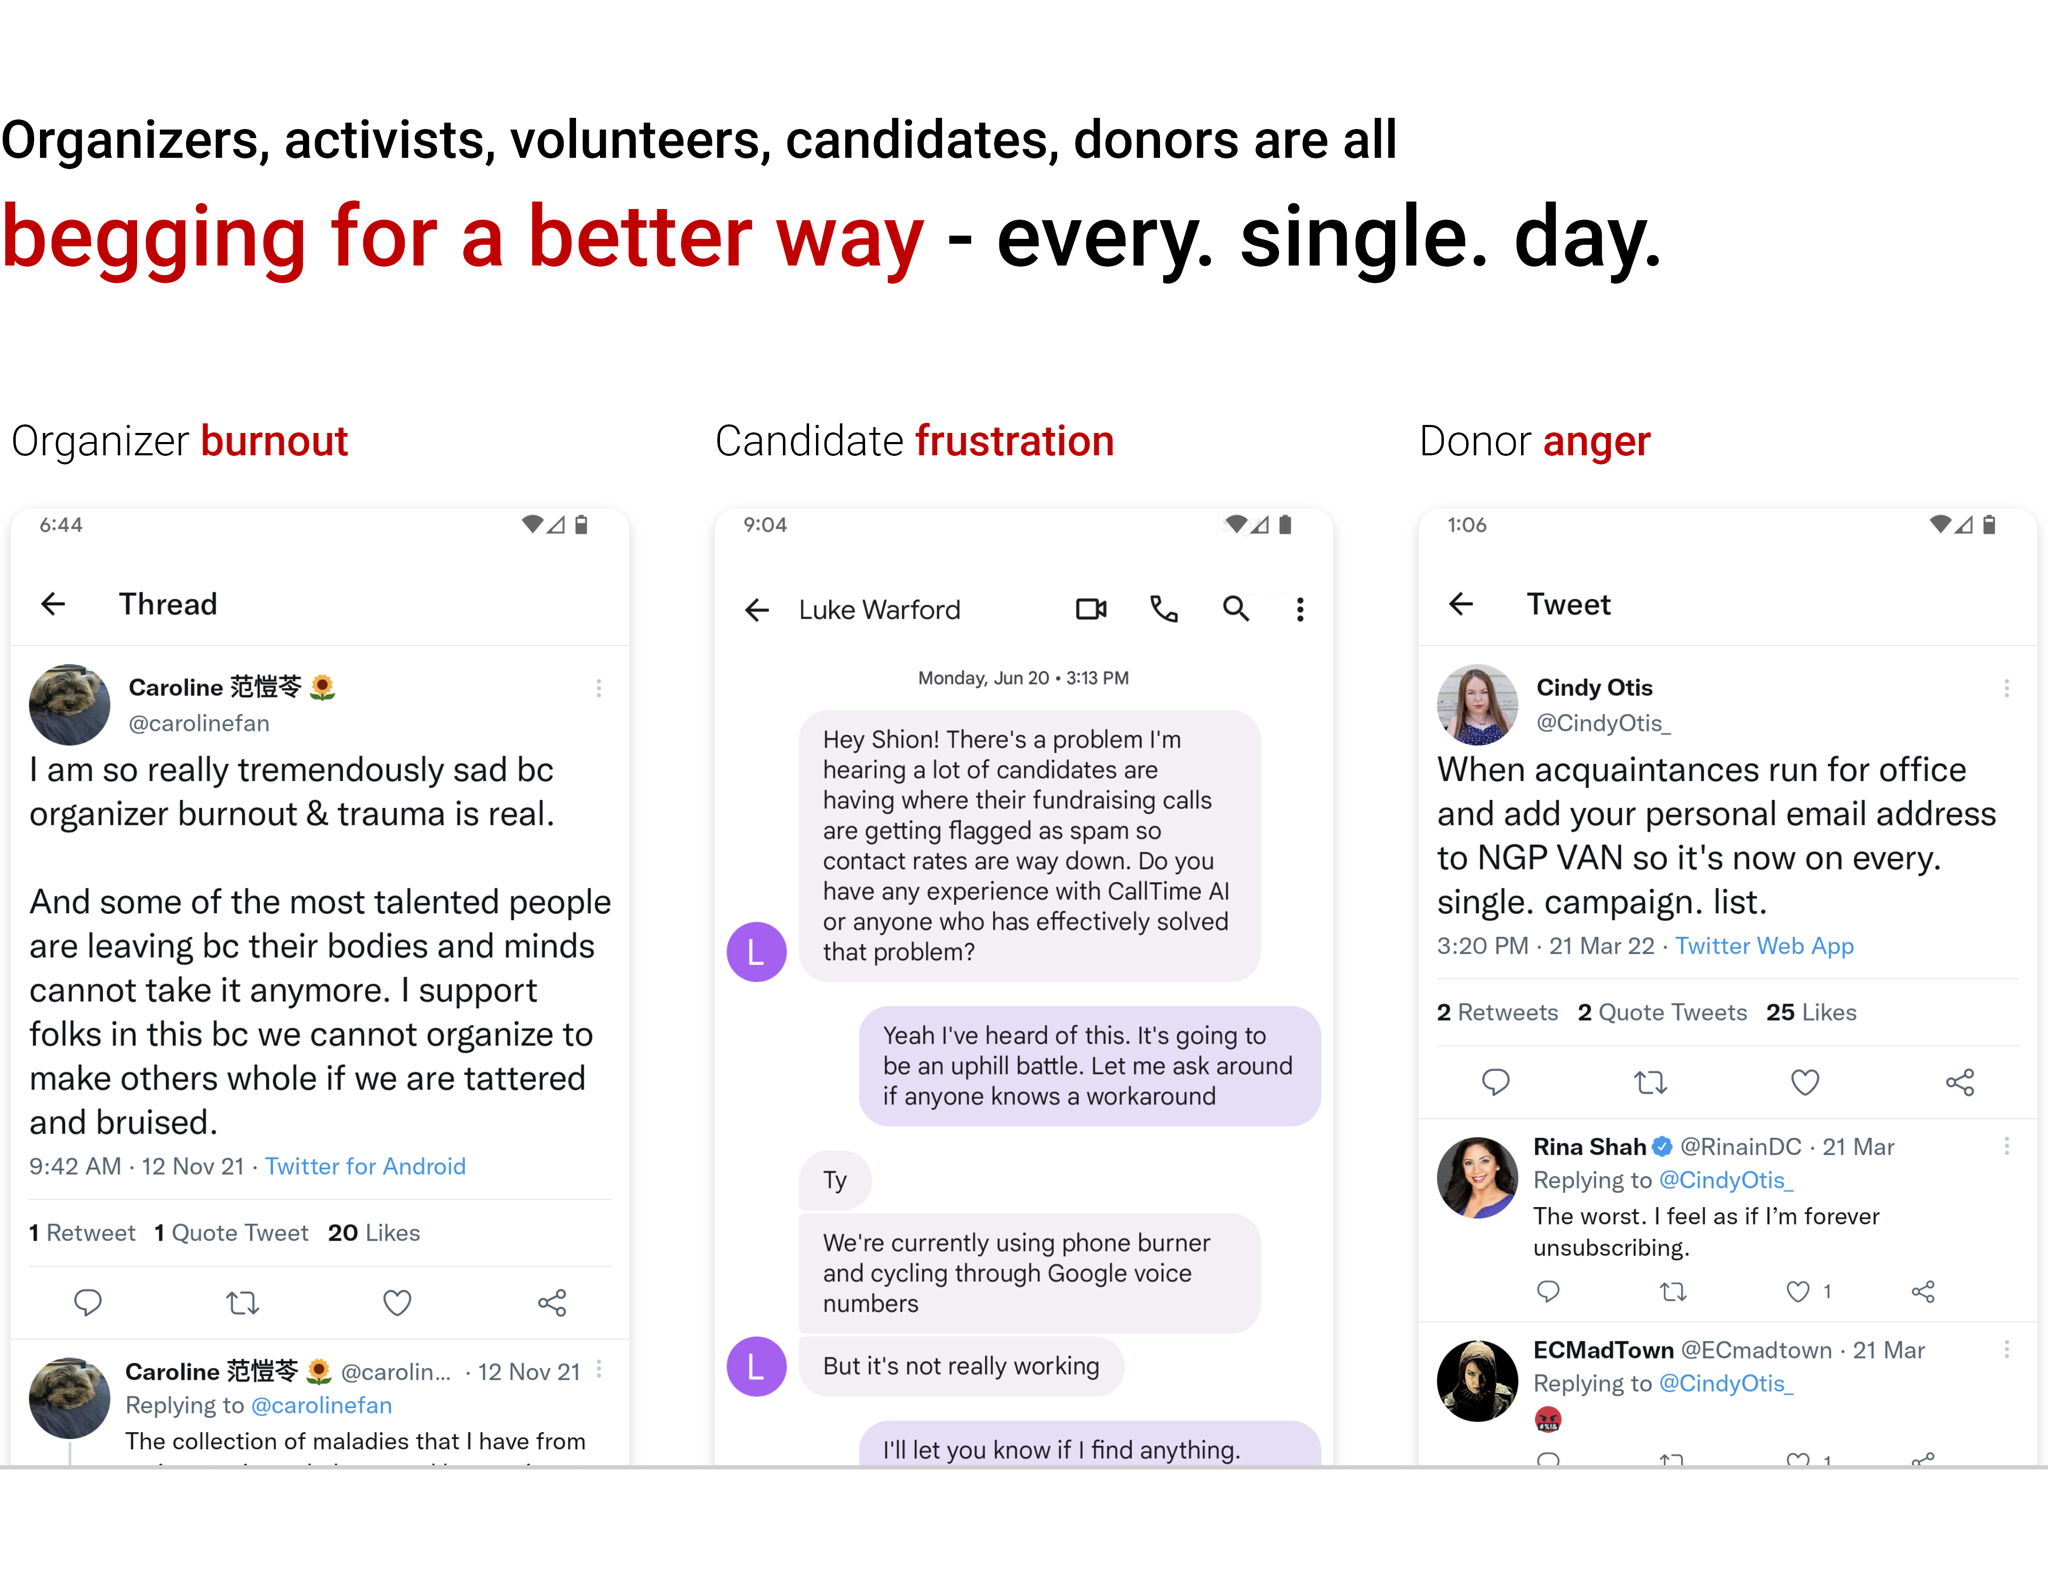 Organizers, activists, volunteers, candidates, donors are all begging for a better way - every. single. day.